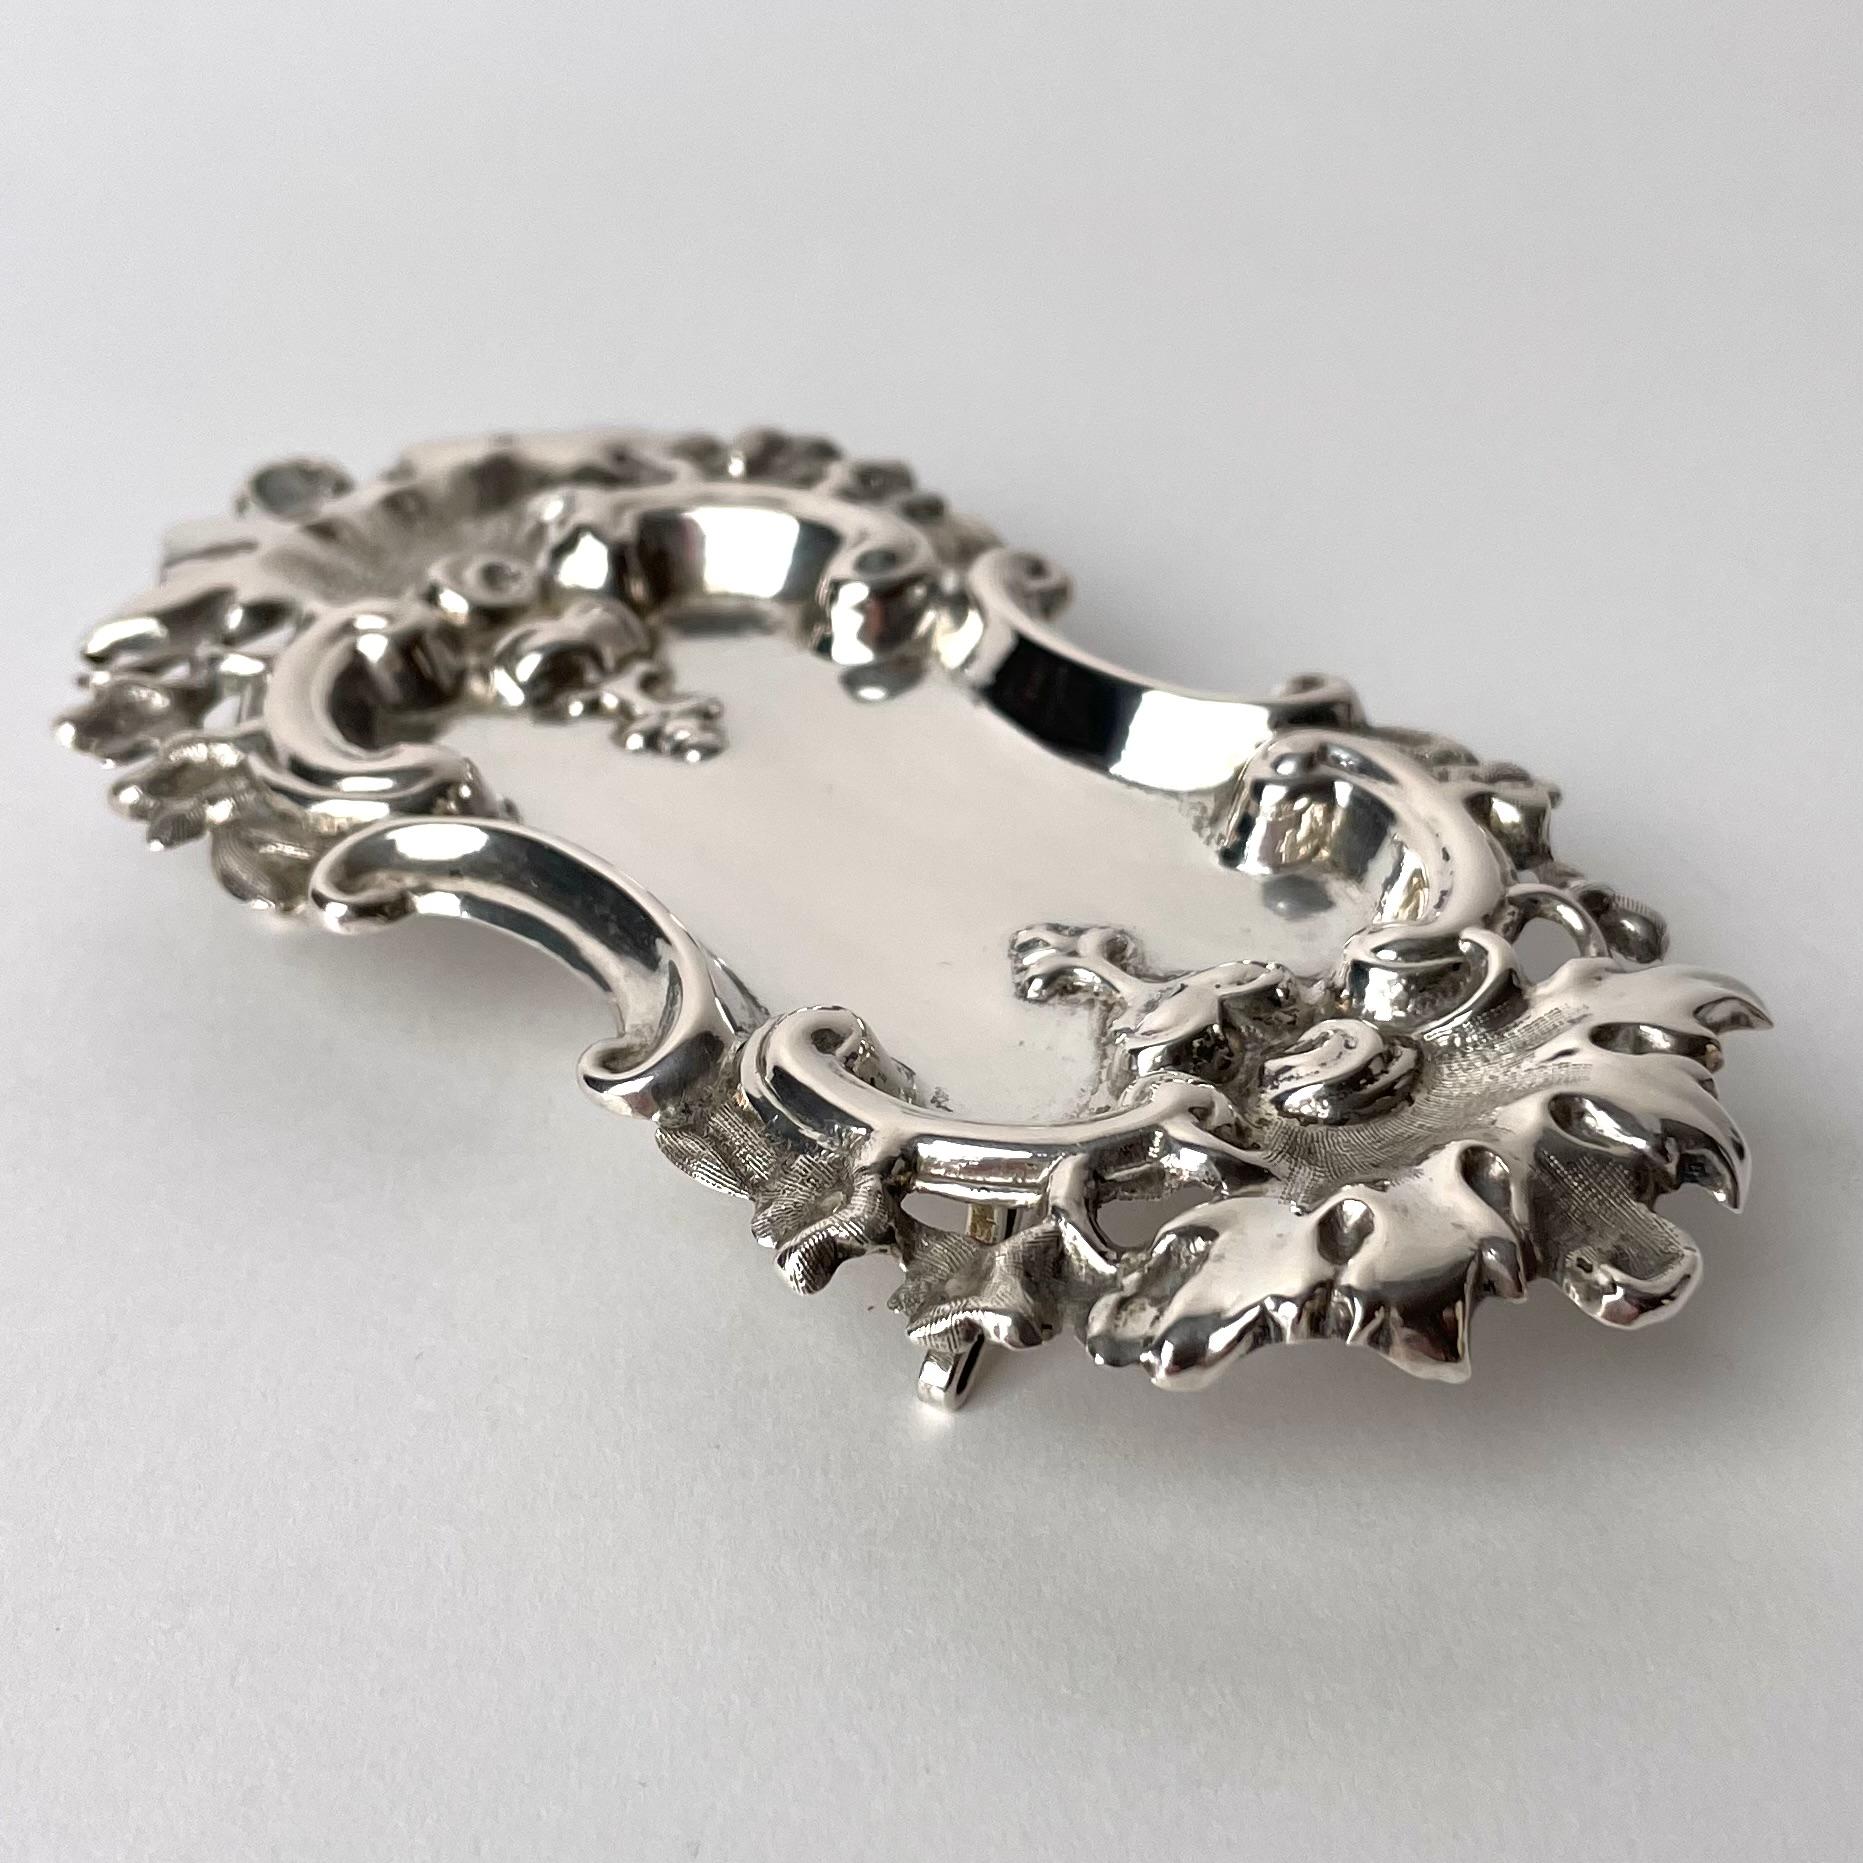 Beautiful Swedish pin tray in stamped silver dated 1865 (L5) in Rococo Revival. Richly decorated in period style.

Wear consistent with age and use